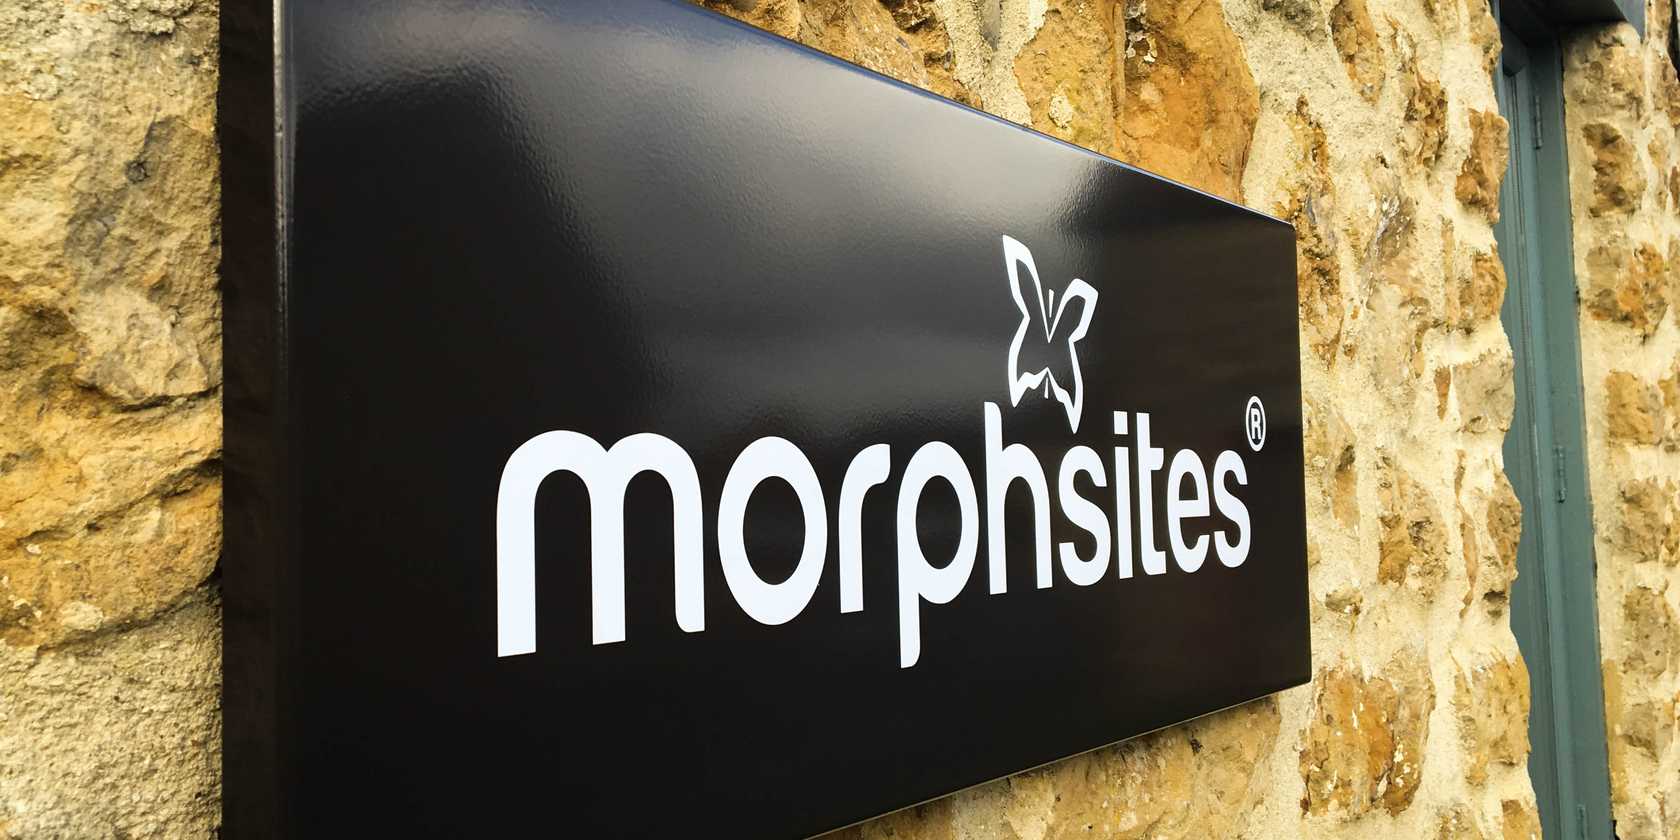 Wall Mounted Tray Sign for Morphsites